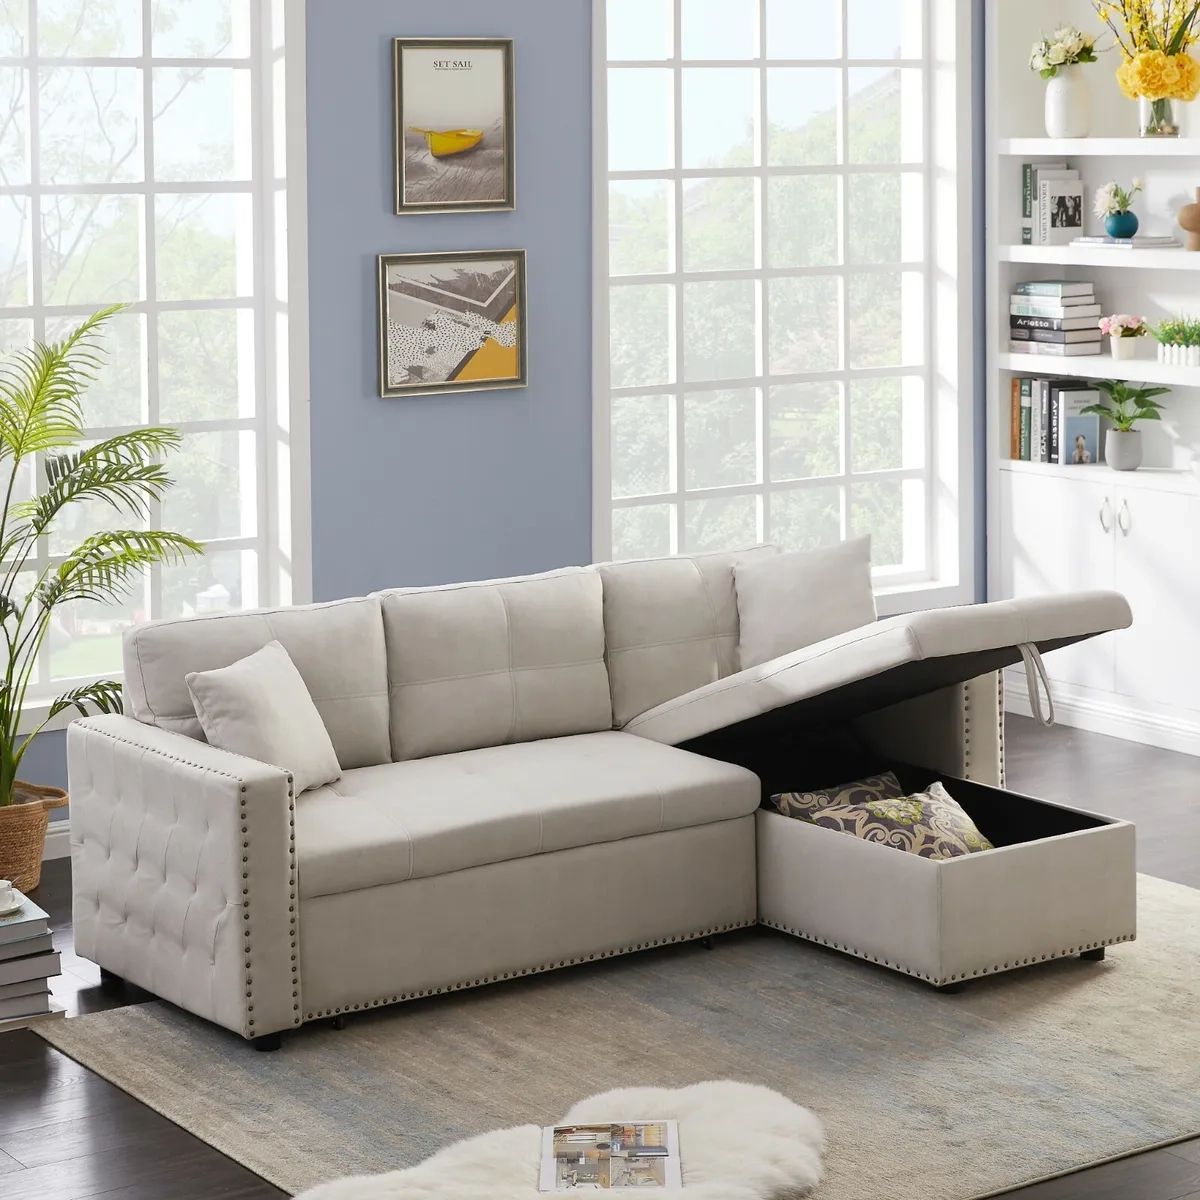 Reversible Sectional Leather Sofa Set Pull Off Bed Sofa L Shaped Corner  Couch | Ebay Intended For Microfiber Sectional Corner Sofas (View 12 of 15)